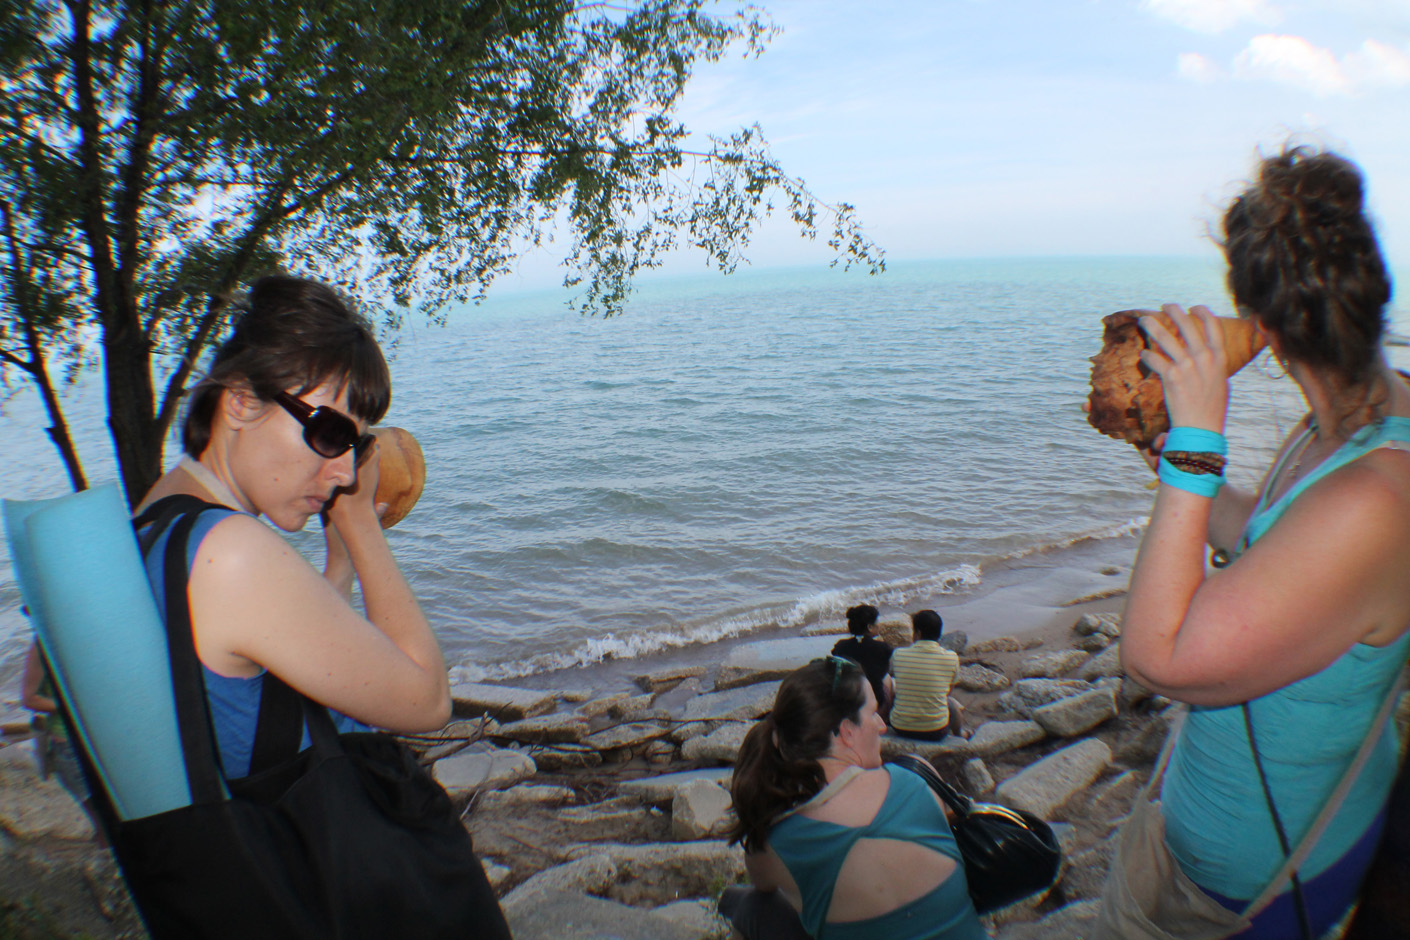  Listening to waves striking the rocks at Hartigan Beach, ten hand carved wooden burl trumpets used by participants, walk planned and led by Karen McCoy, sponsored by Alternative Spacetime 1300 (artist residency), Chicago, IL. (photo: Caro d’Offay) 